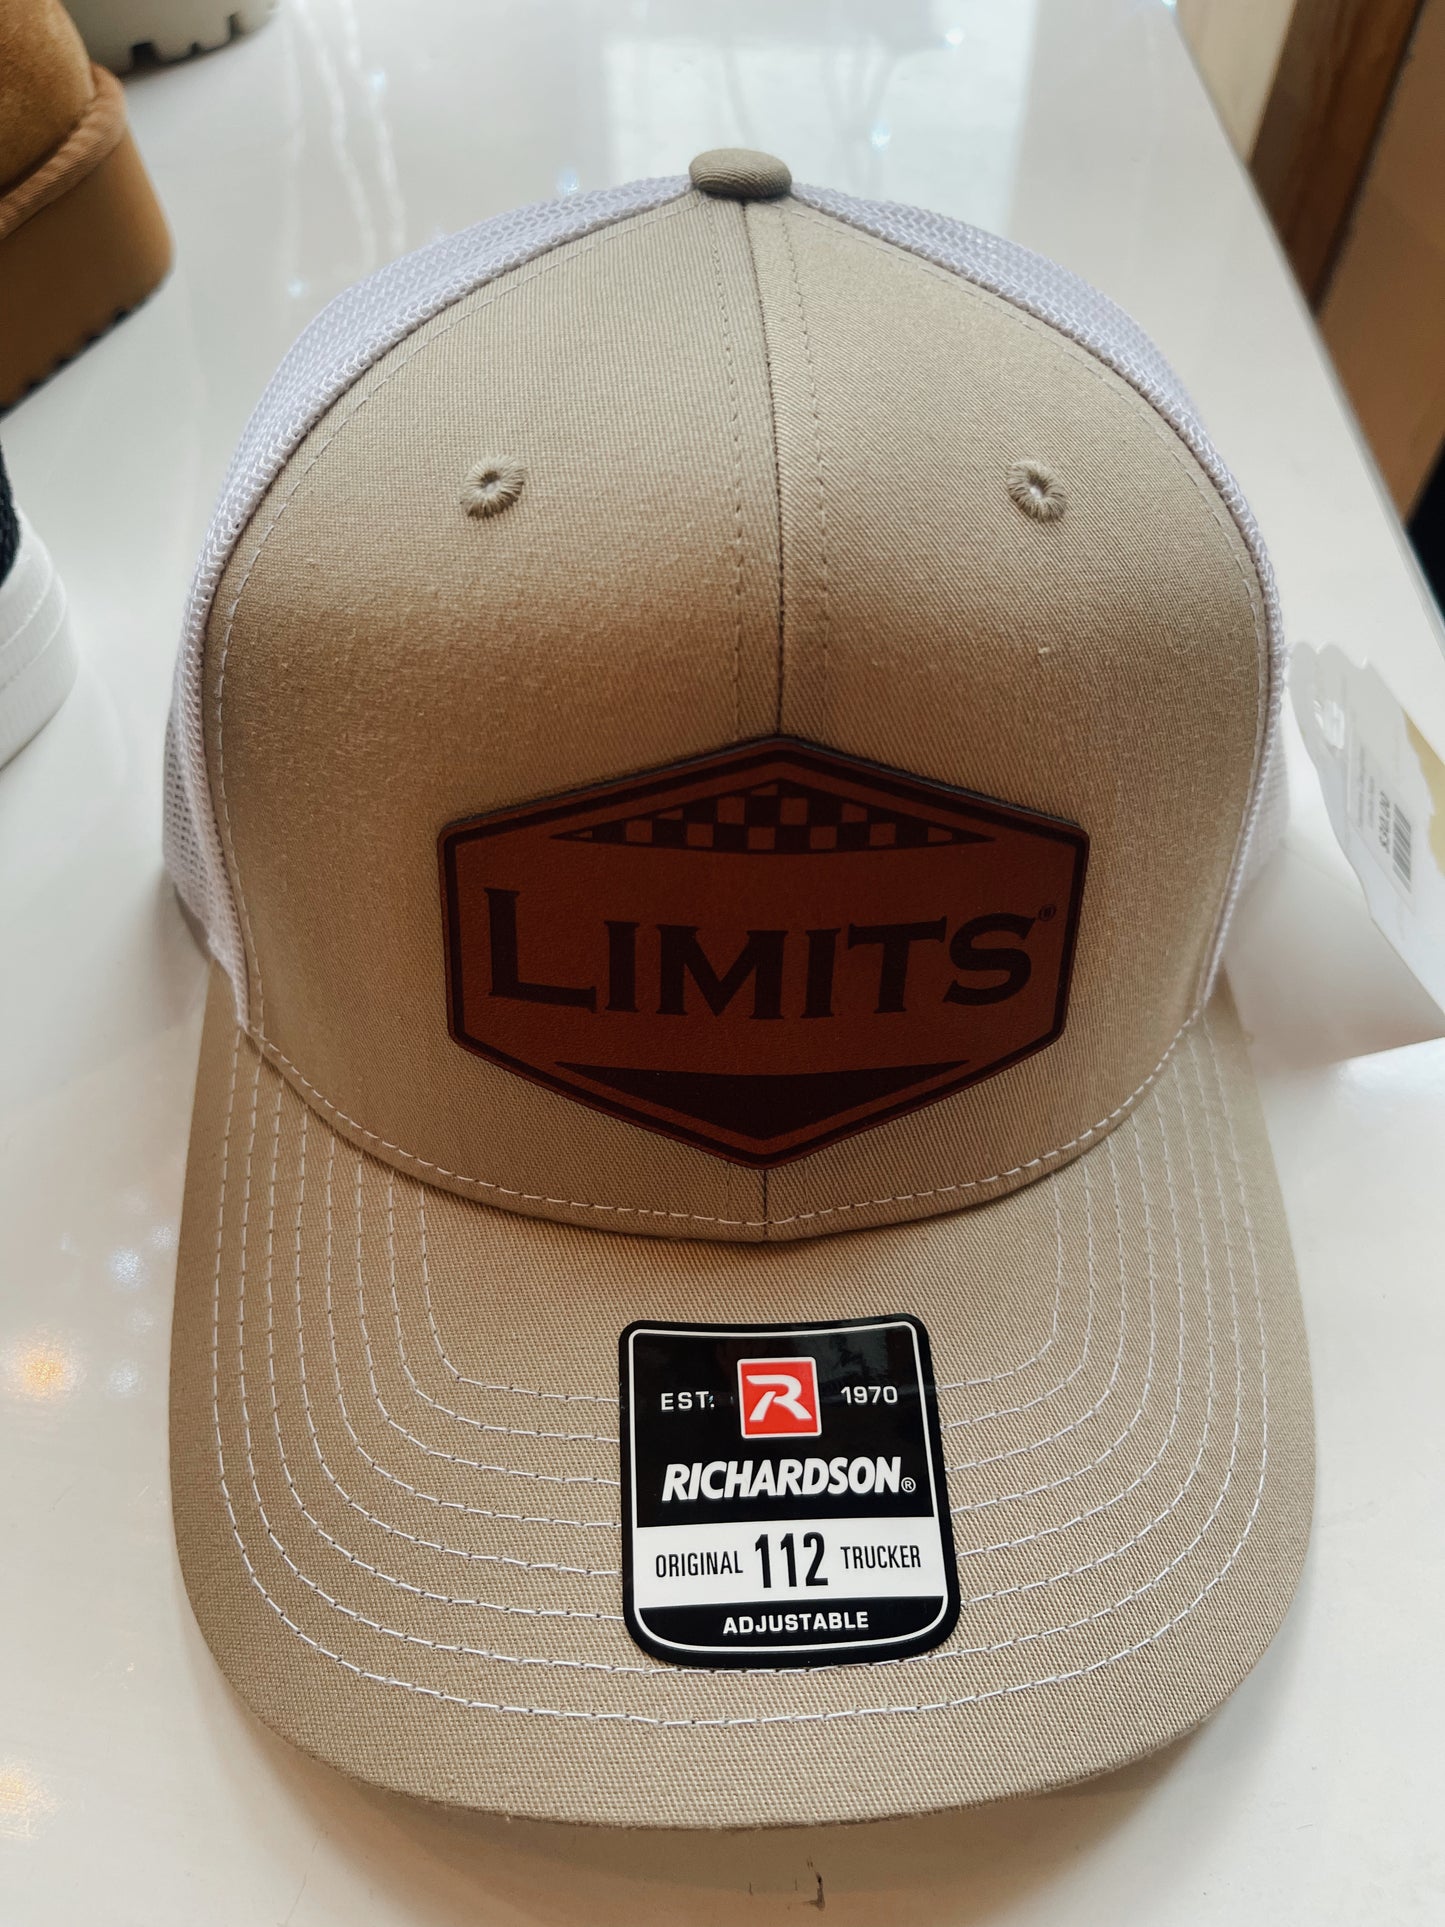 Limits checkered patch hat